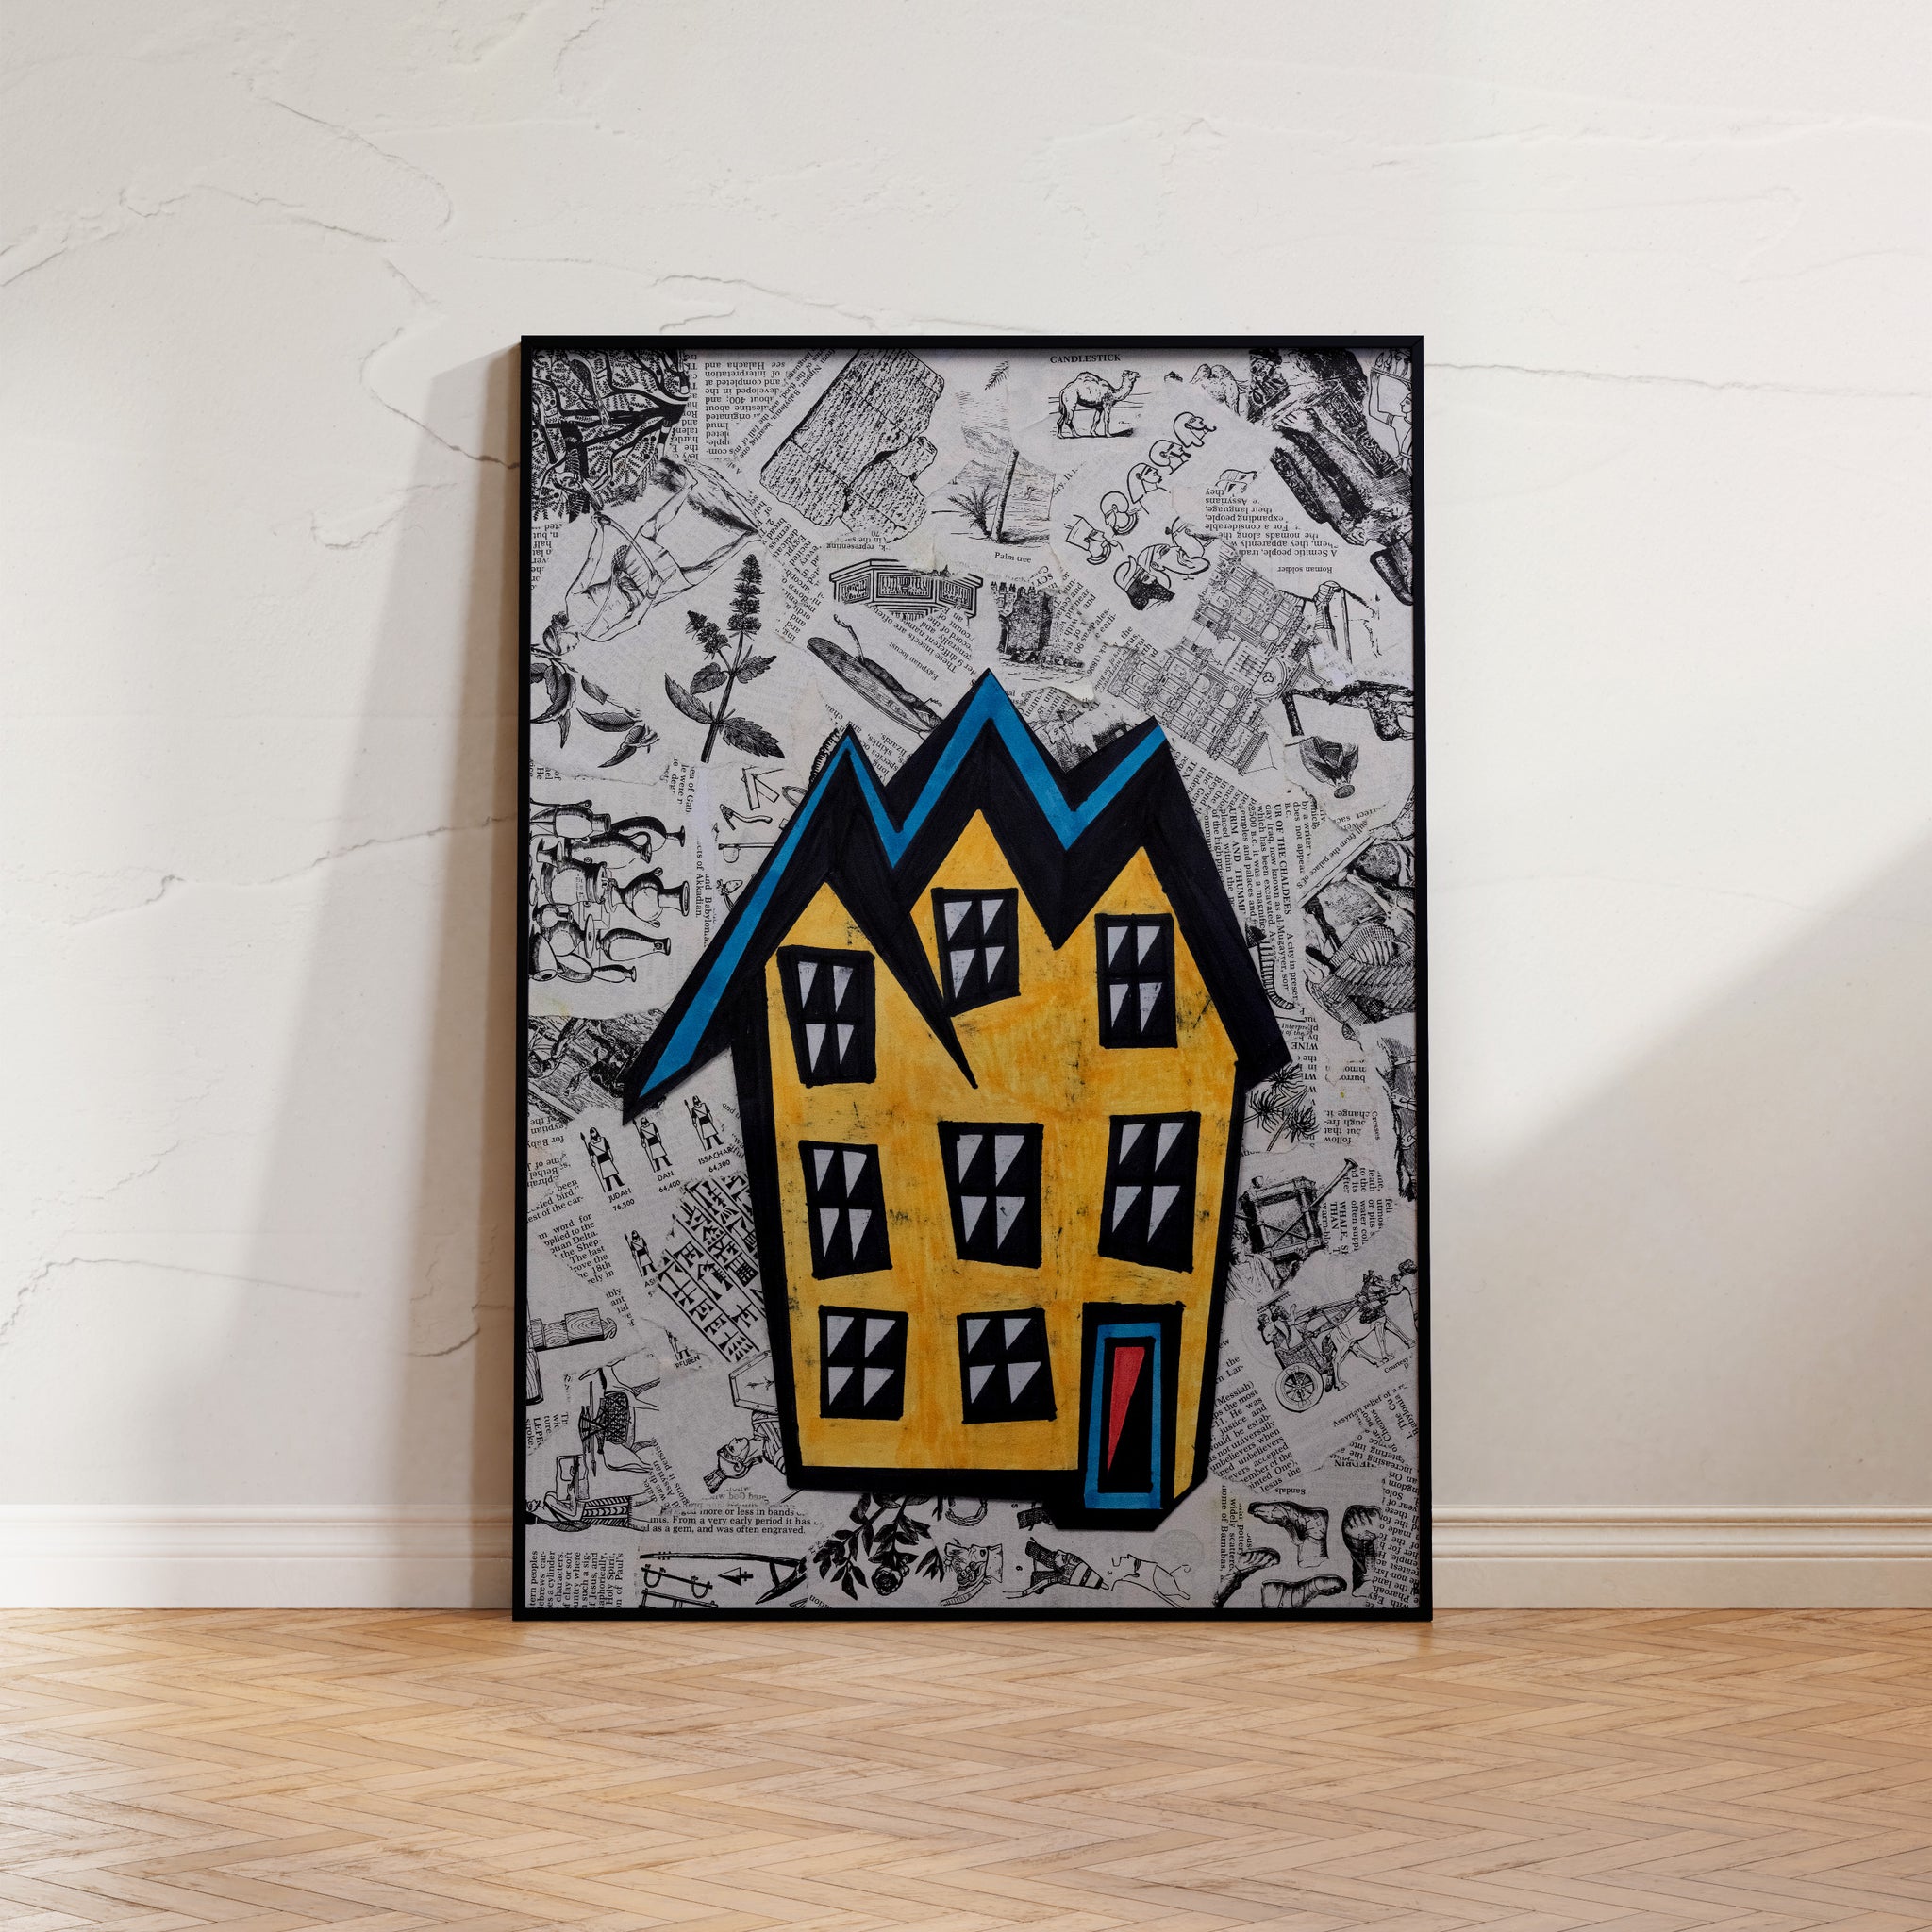 "Urban Personality," a vibrant mixed-media artwork featuring a standout yellow house against a monochrome newspaper collage, symbolizing individuality in city life.